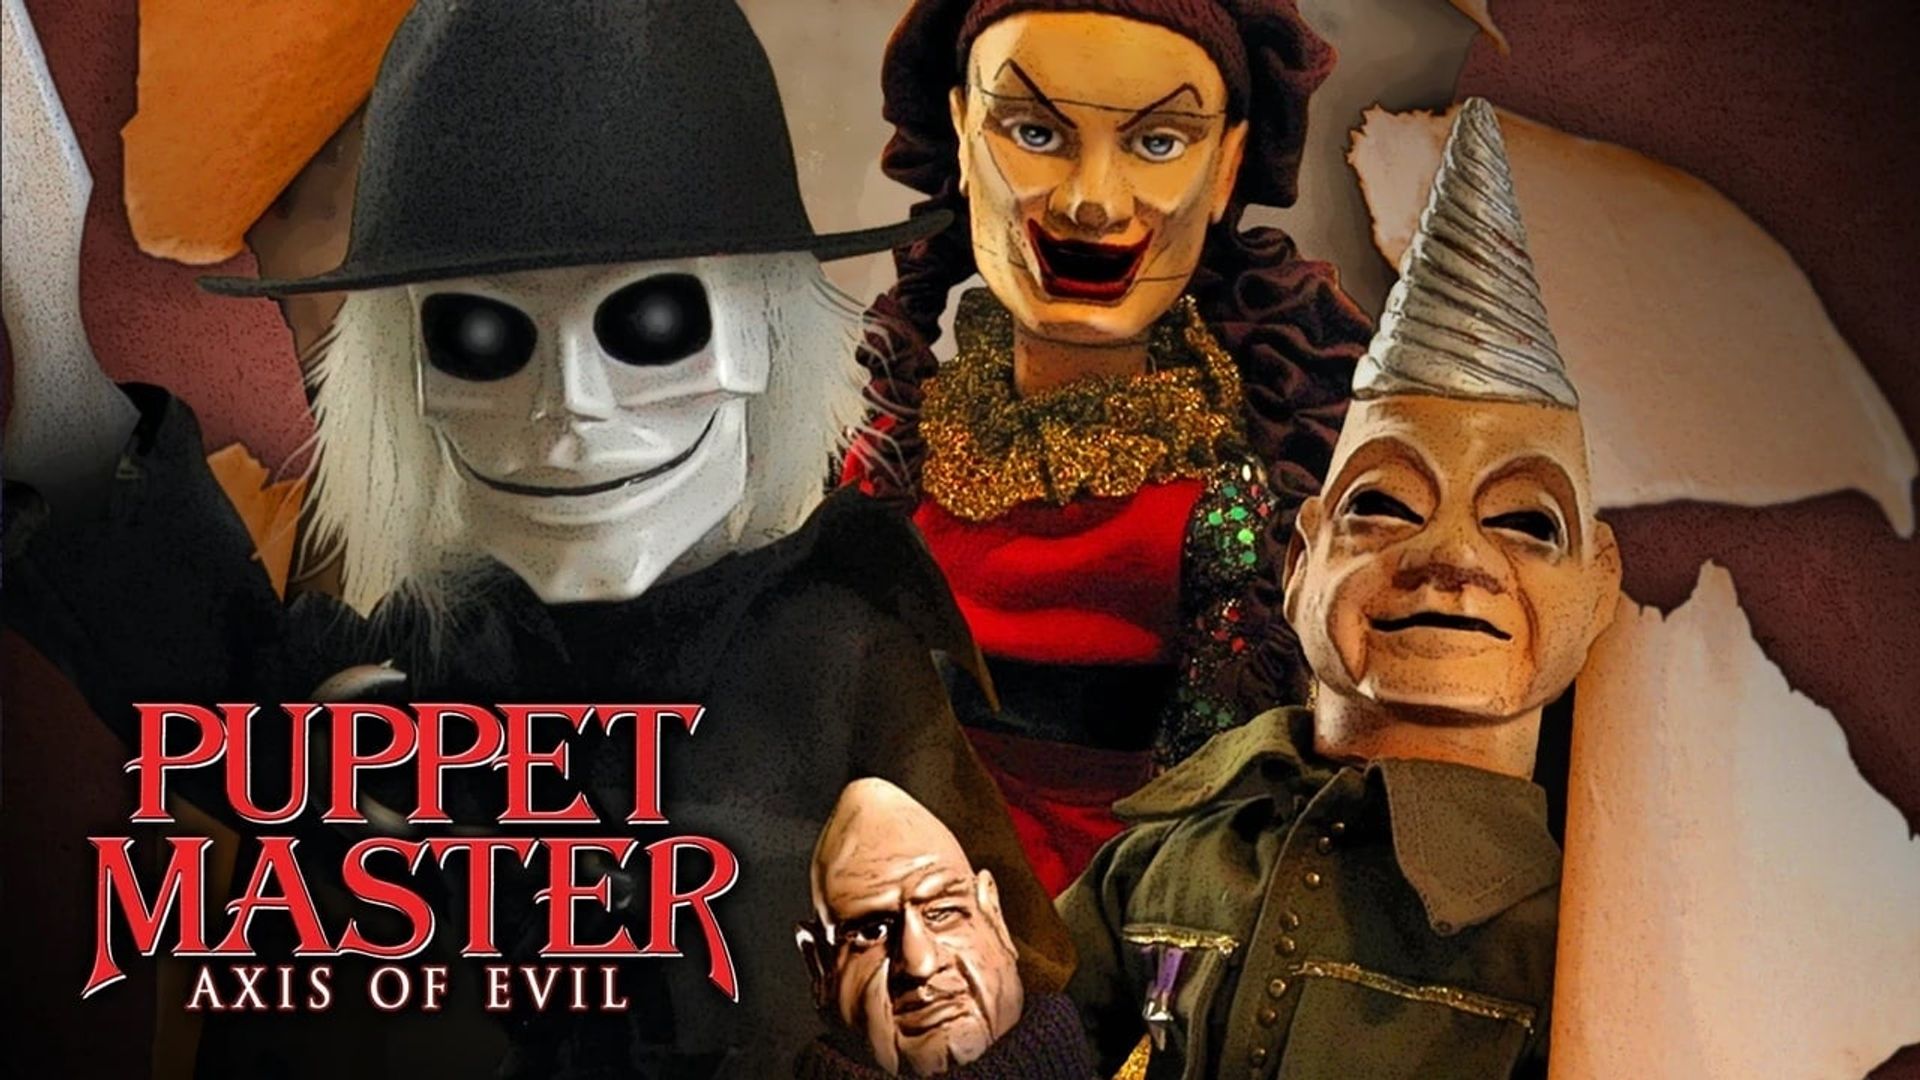 Puppetmaster adventures